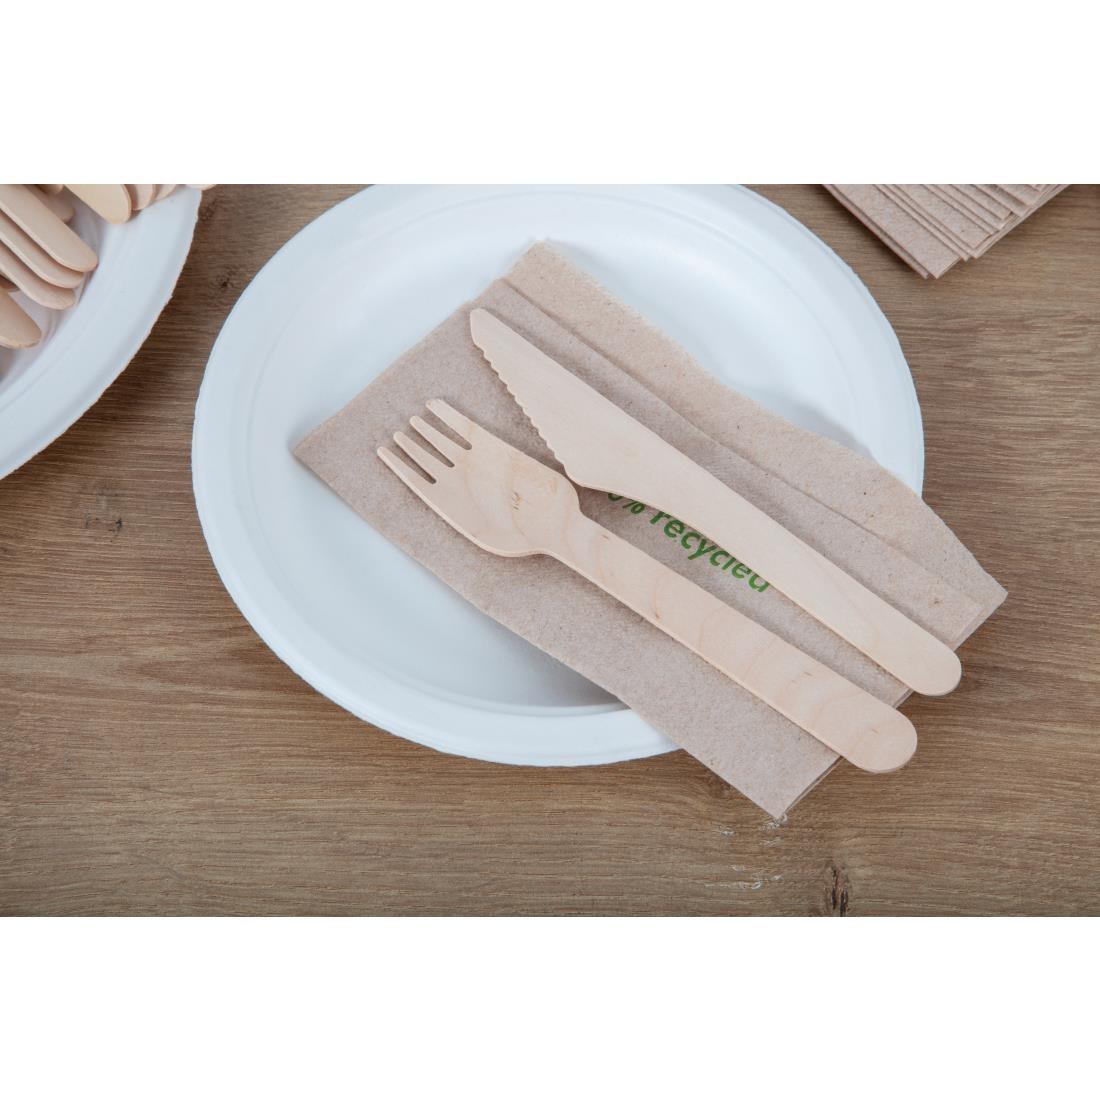 Fiesta Compostable Disposable Wooden Forks (Pack of 100) - CD903  - 4